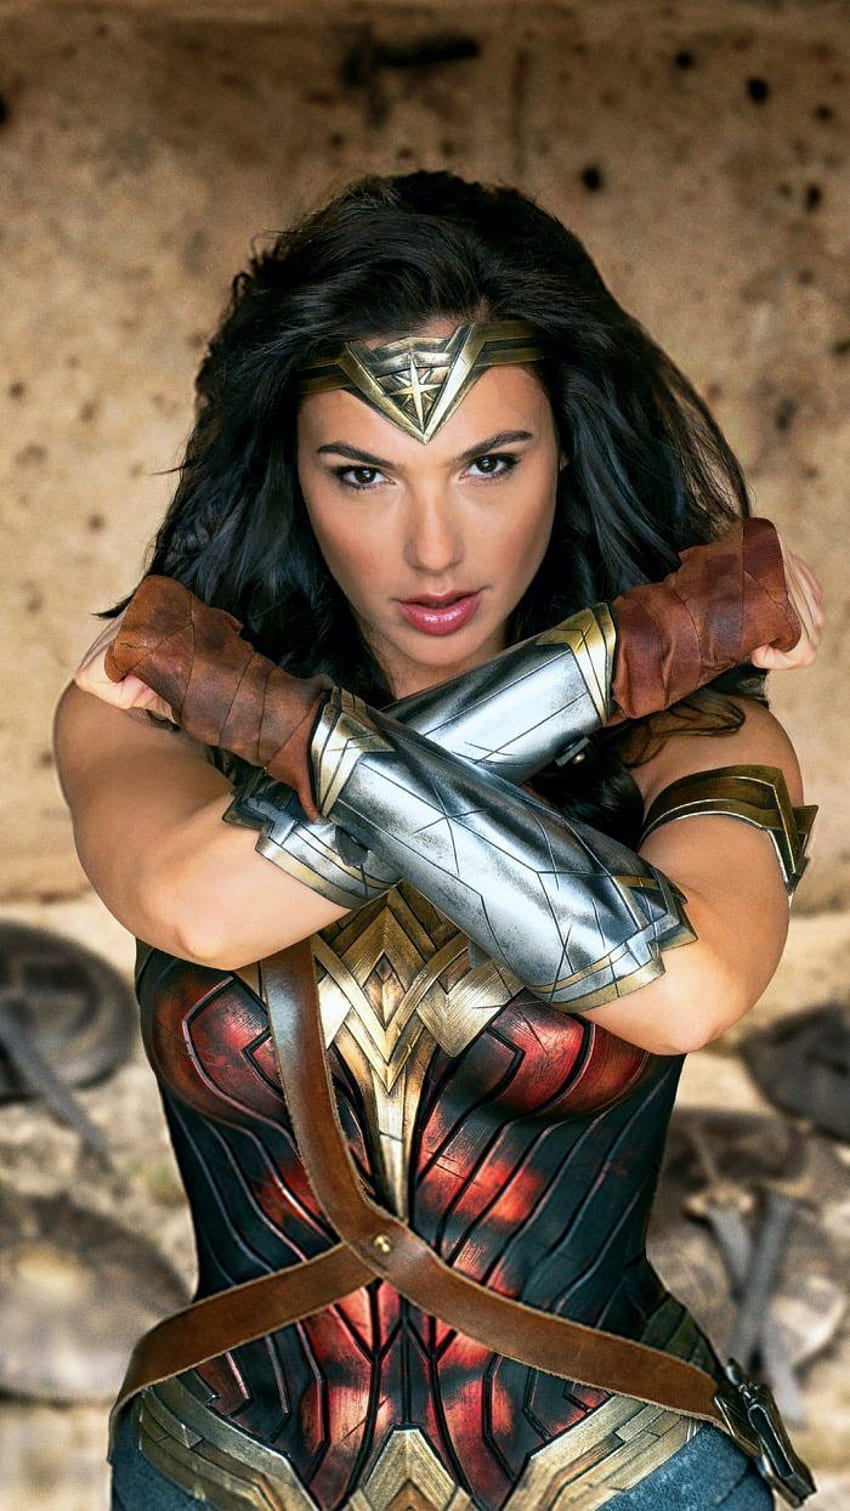 130 Wonder Woman HD Wallpapers and Backgrounds